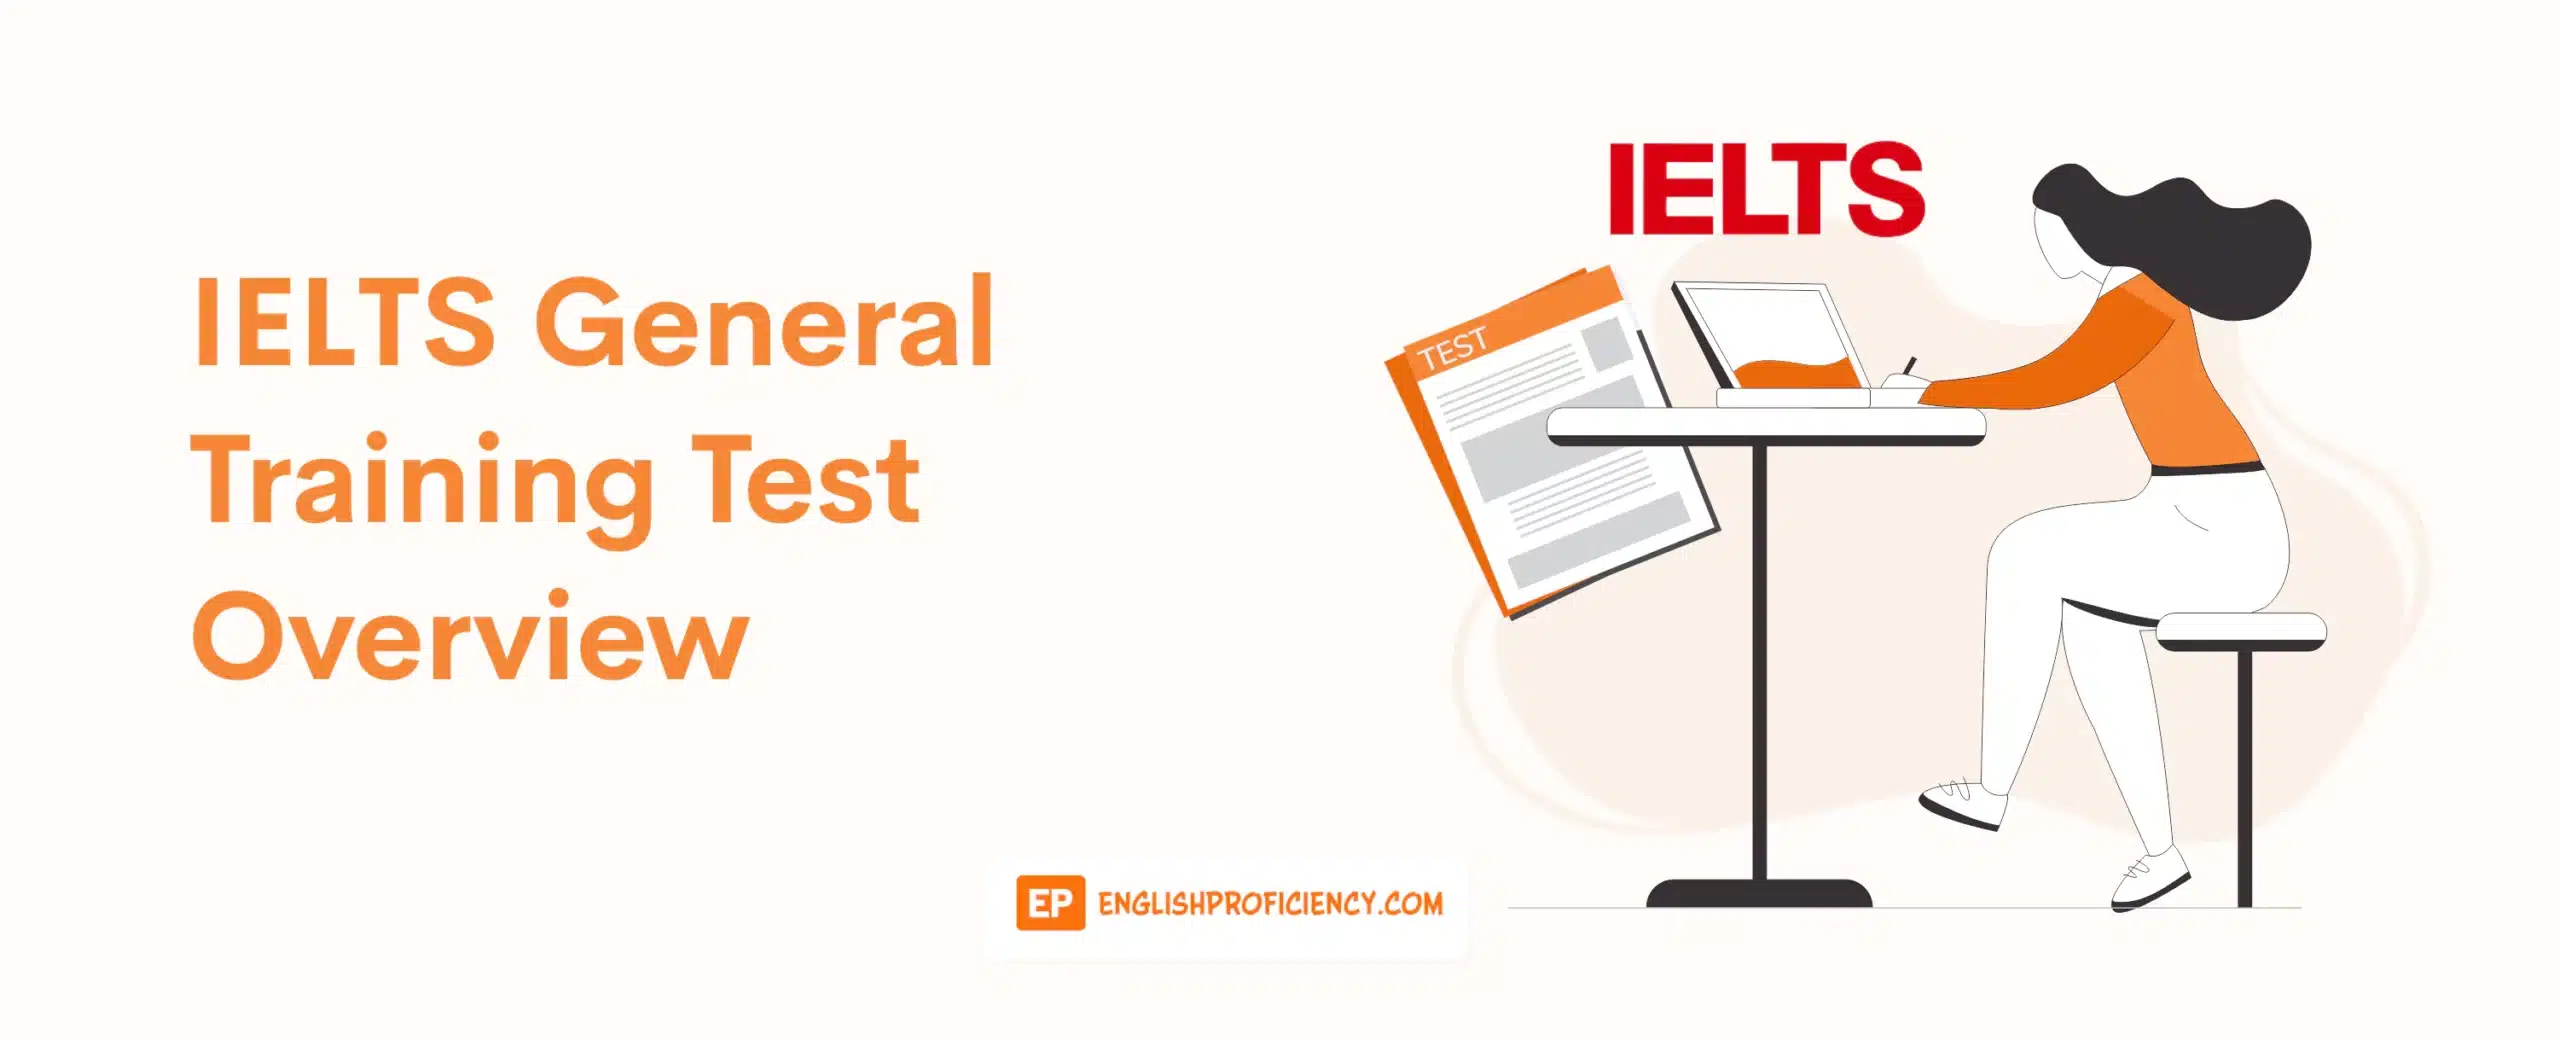 IELTS General Training Test Overview